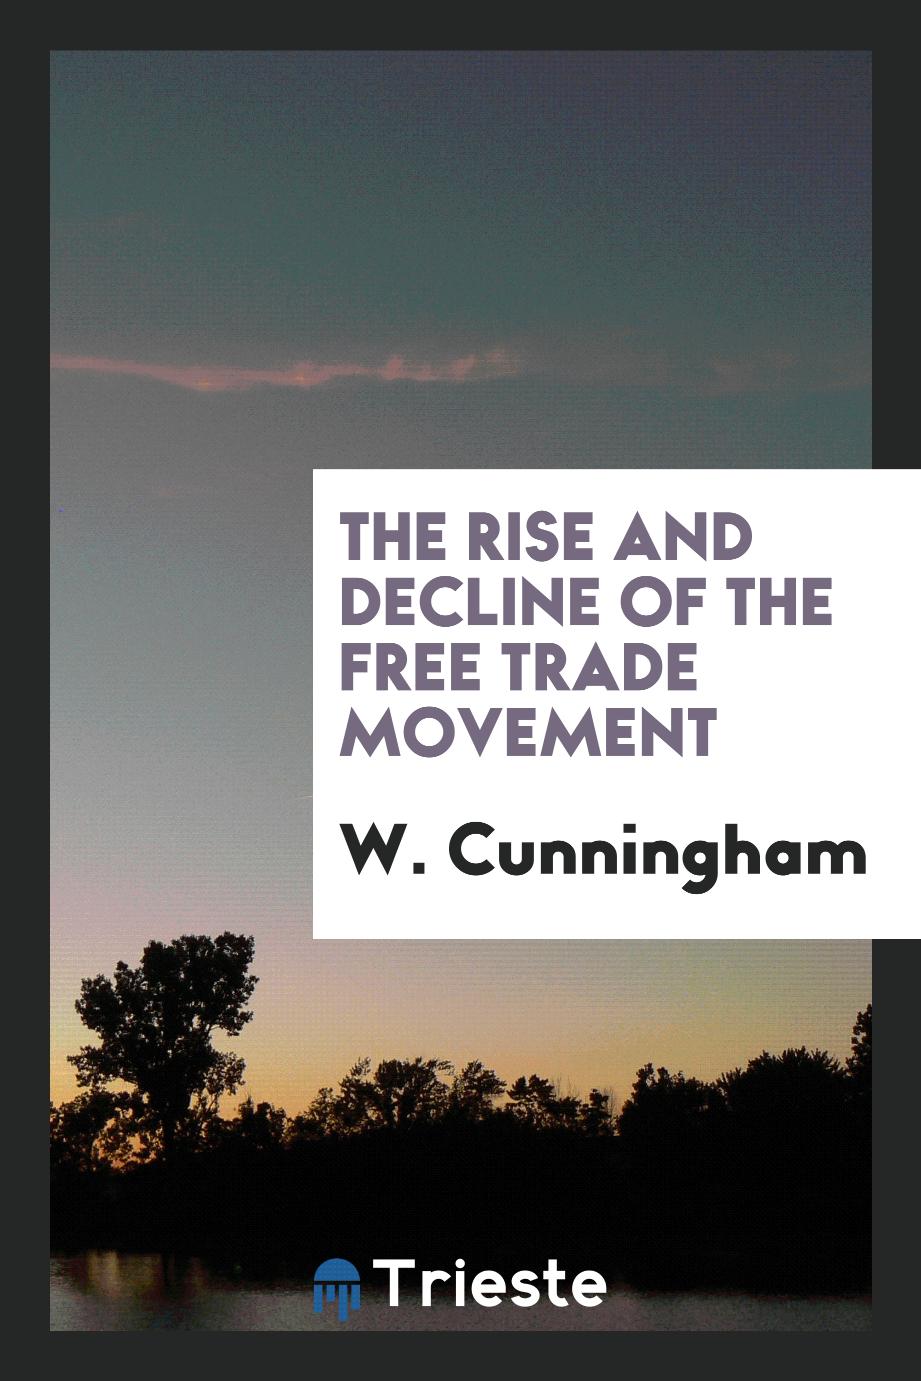 The rise and decline of the free trade movement